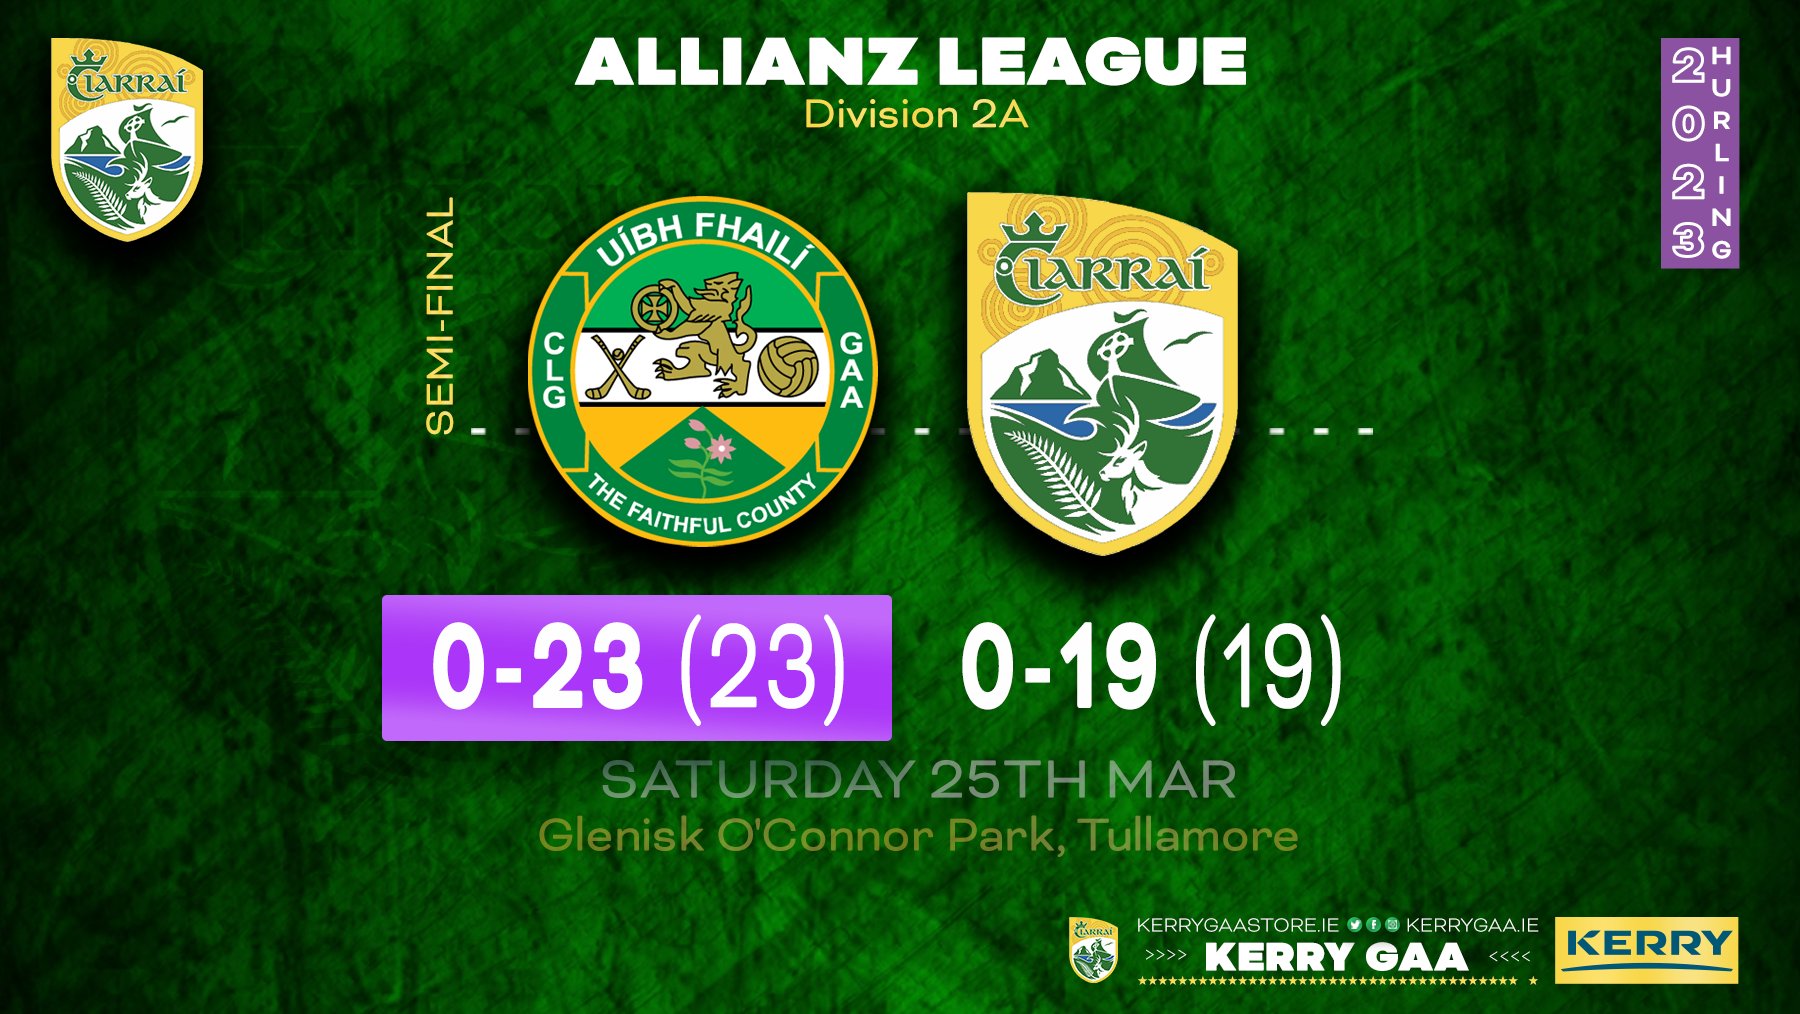 Disappointment for Hurlers with Semi-Final loss to Offaly